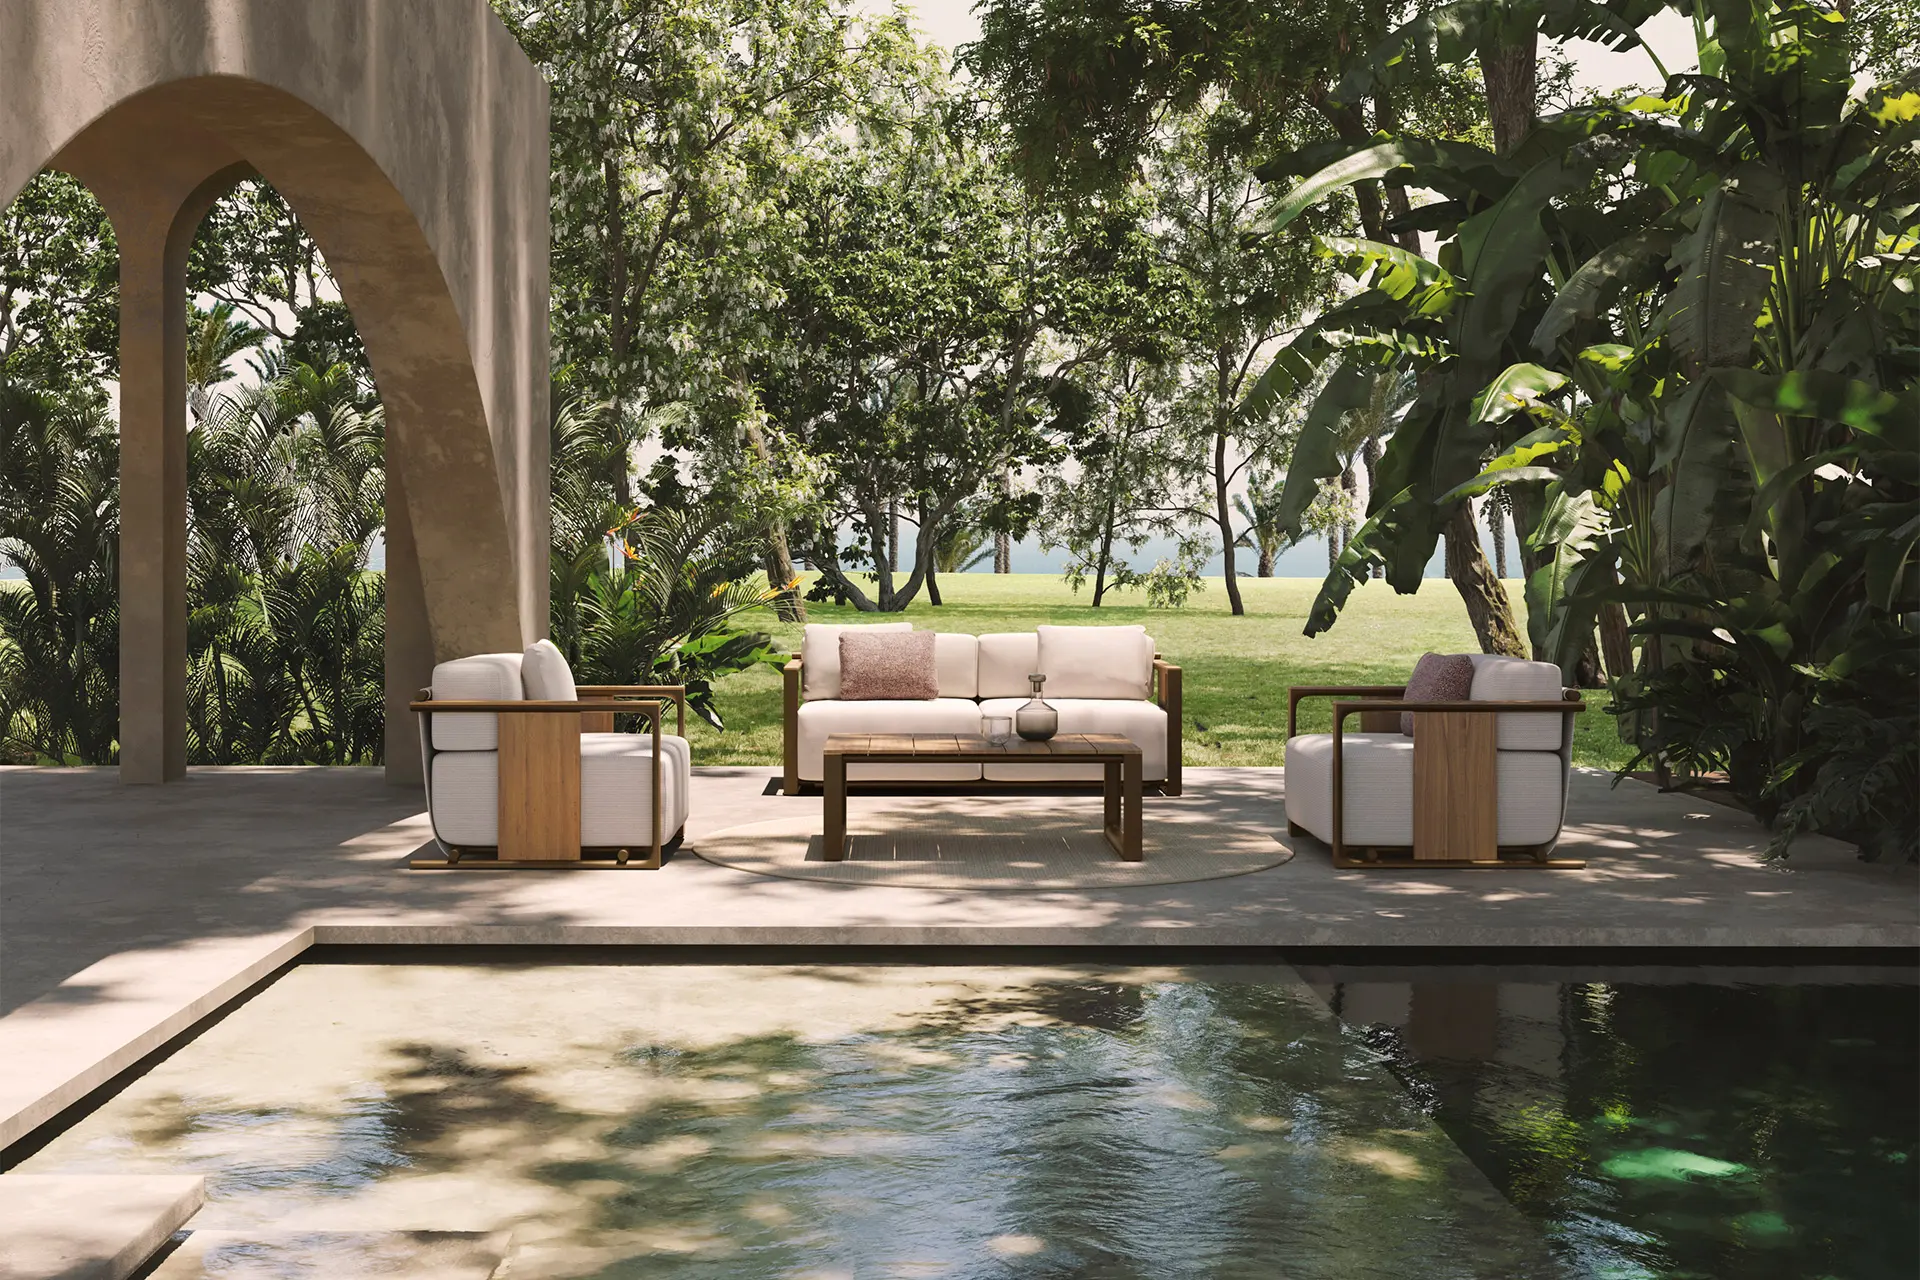 The outdoor sofa from the Tulum Collection is now available